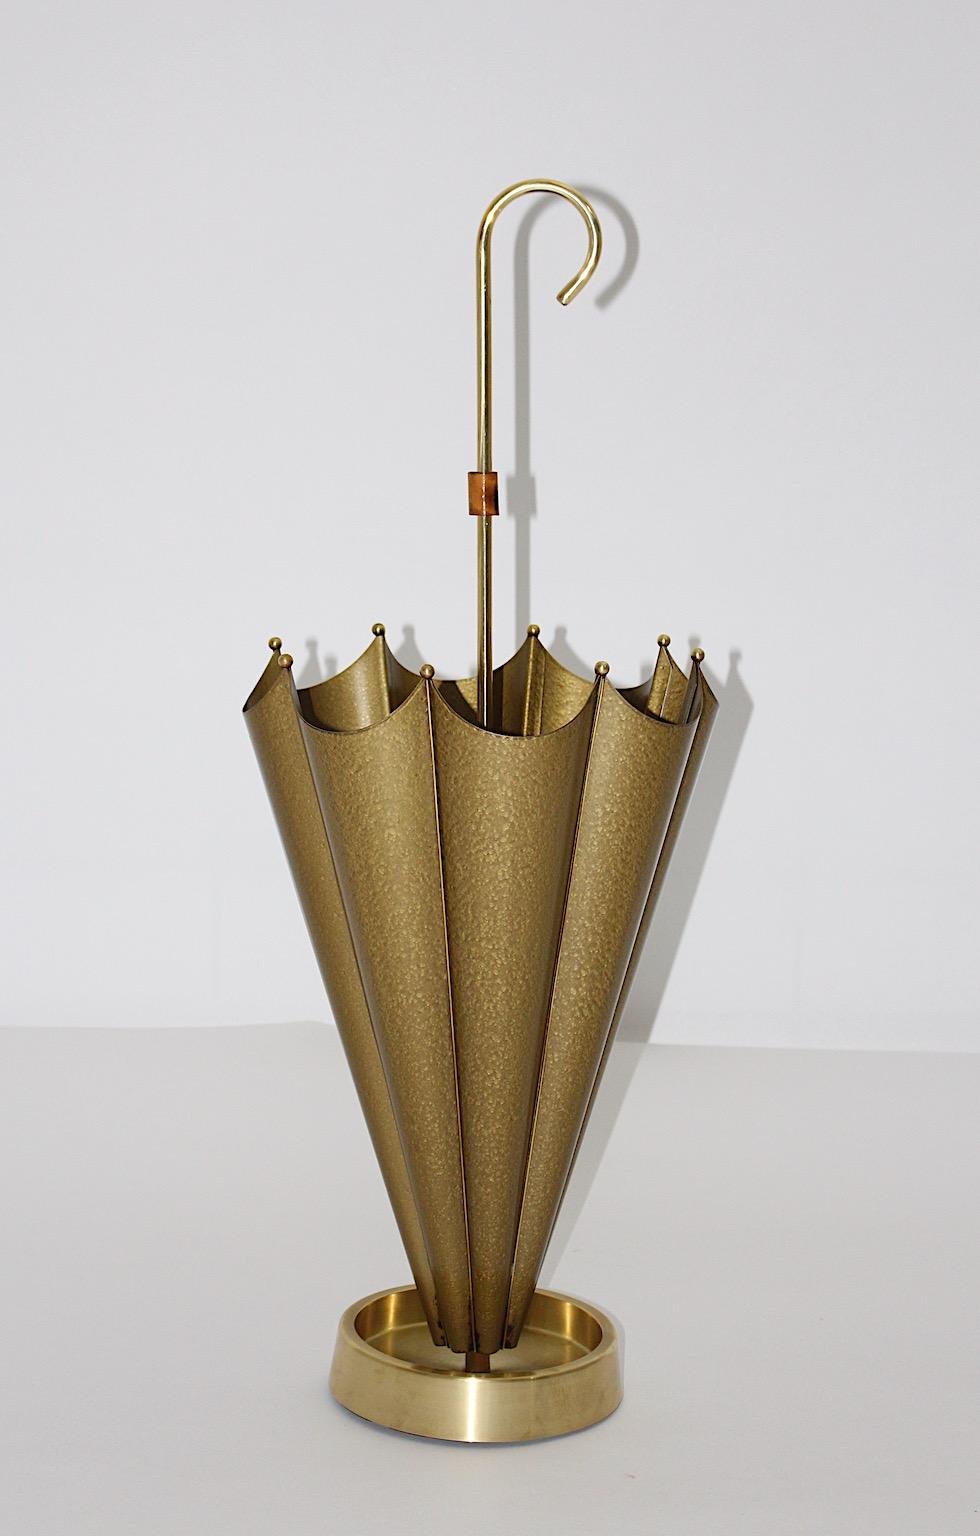 Mid-Century Modern vintage umbrella stand from metal and brass in gold metallic color tone 1950s Italy.
The stunning umbrella stand shows a brass drip cup, brass balls and an umbrella like stand from golden metal.
The handle features a bamboo